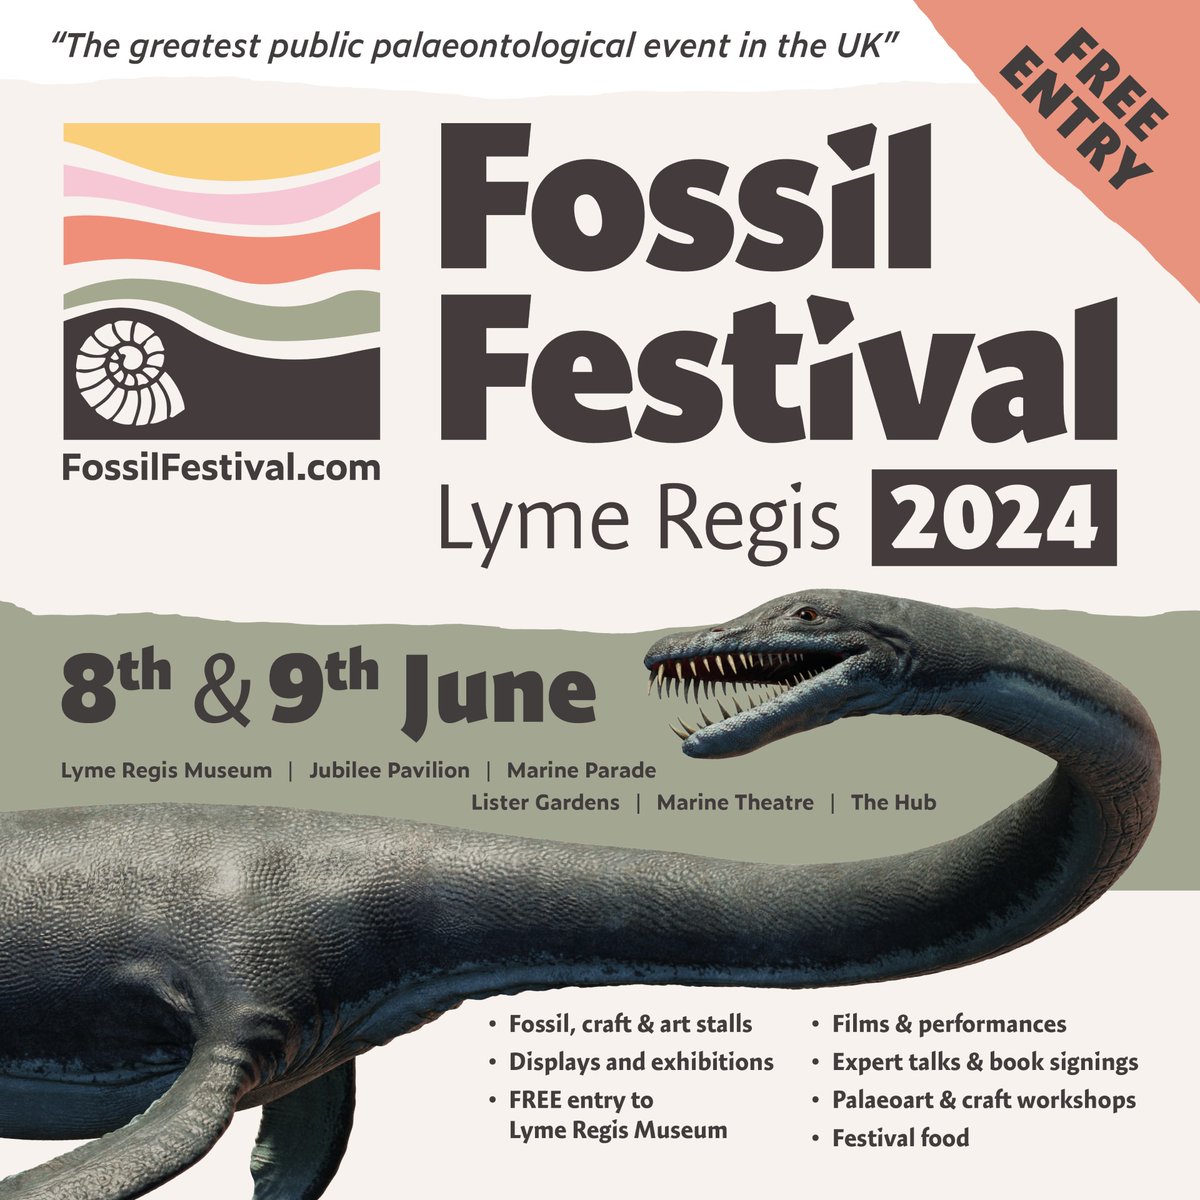 We are delighted once again to partner with Lyme Regis Museum and to be a part of this year’s Lyme Regis Fossil Festival on June 8-9. There is an incredible programme and lots of free fun family activities over the course of the festival. @FF_LymeRegis